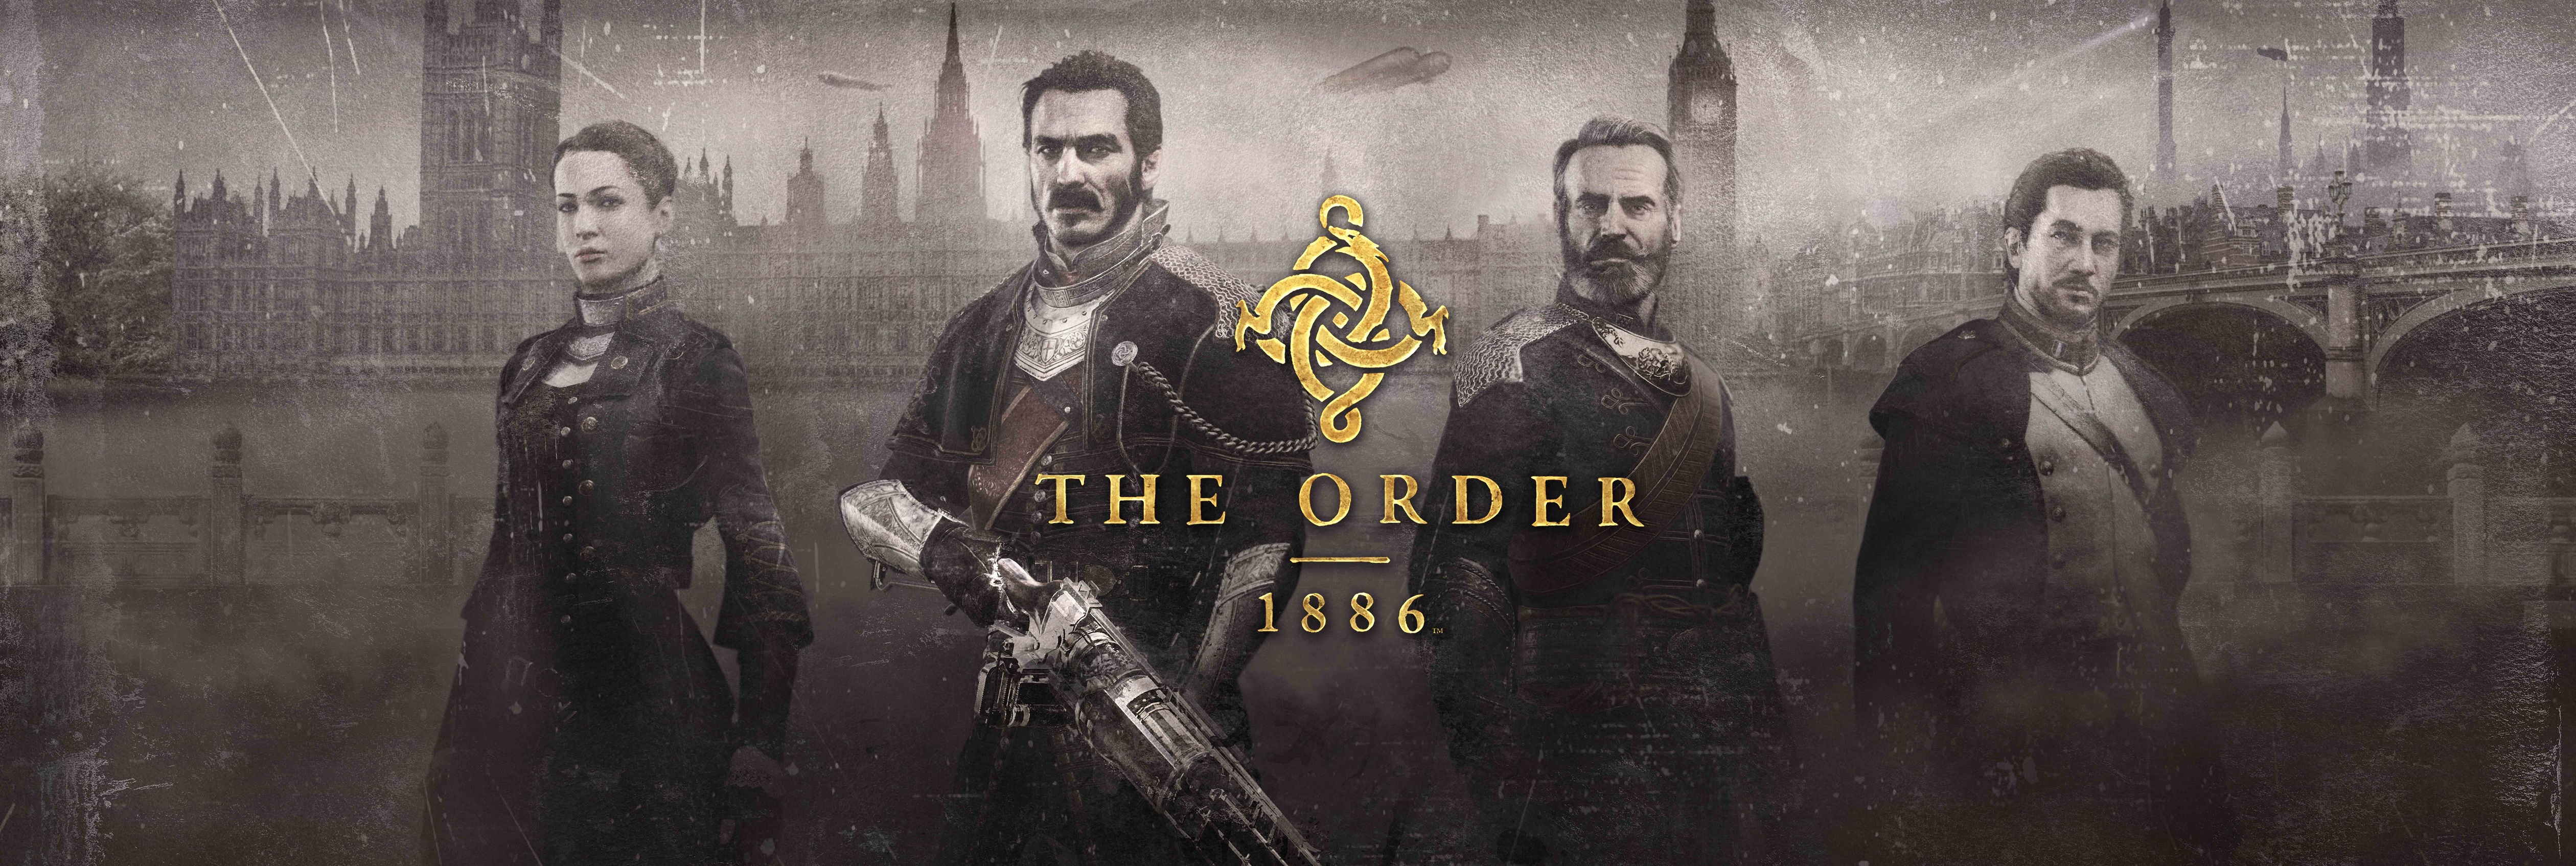 Орден 1886 ps4. The order: 1886. Order 1886 ps4. The order 1886 Постер.